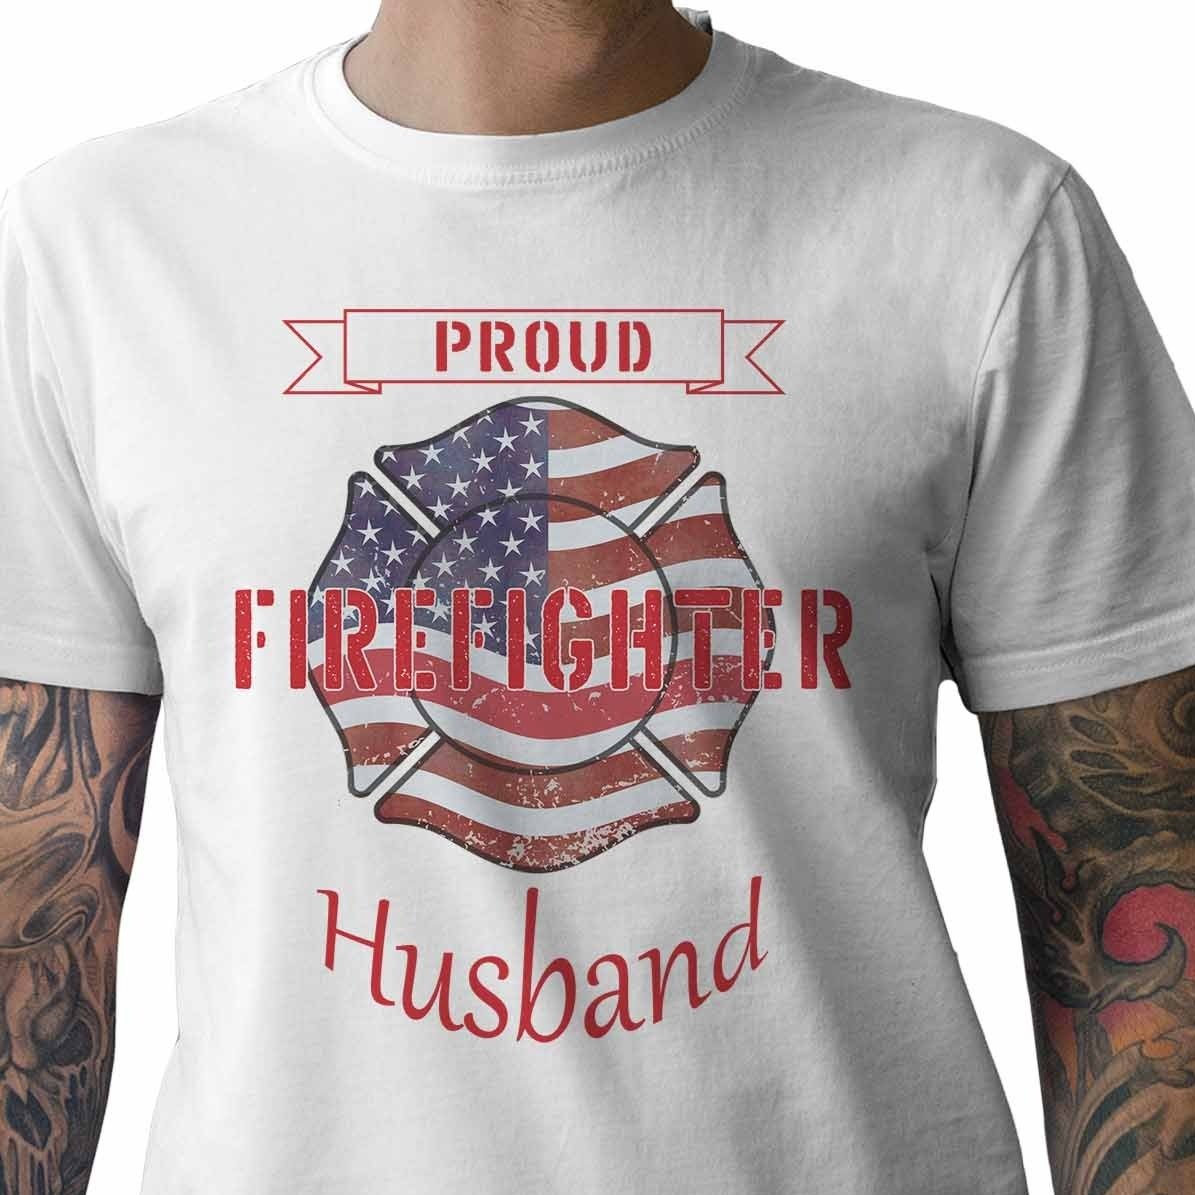 Proud Firefighter Husband - My Custom Tee Party